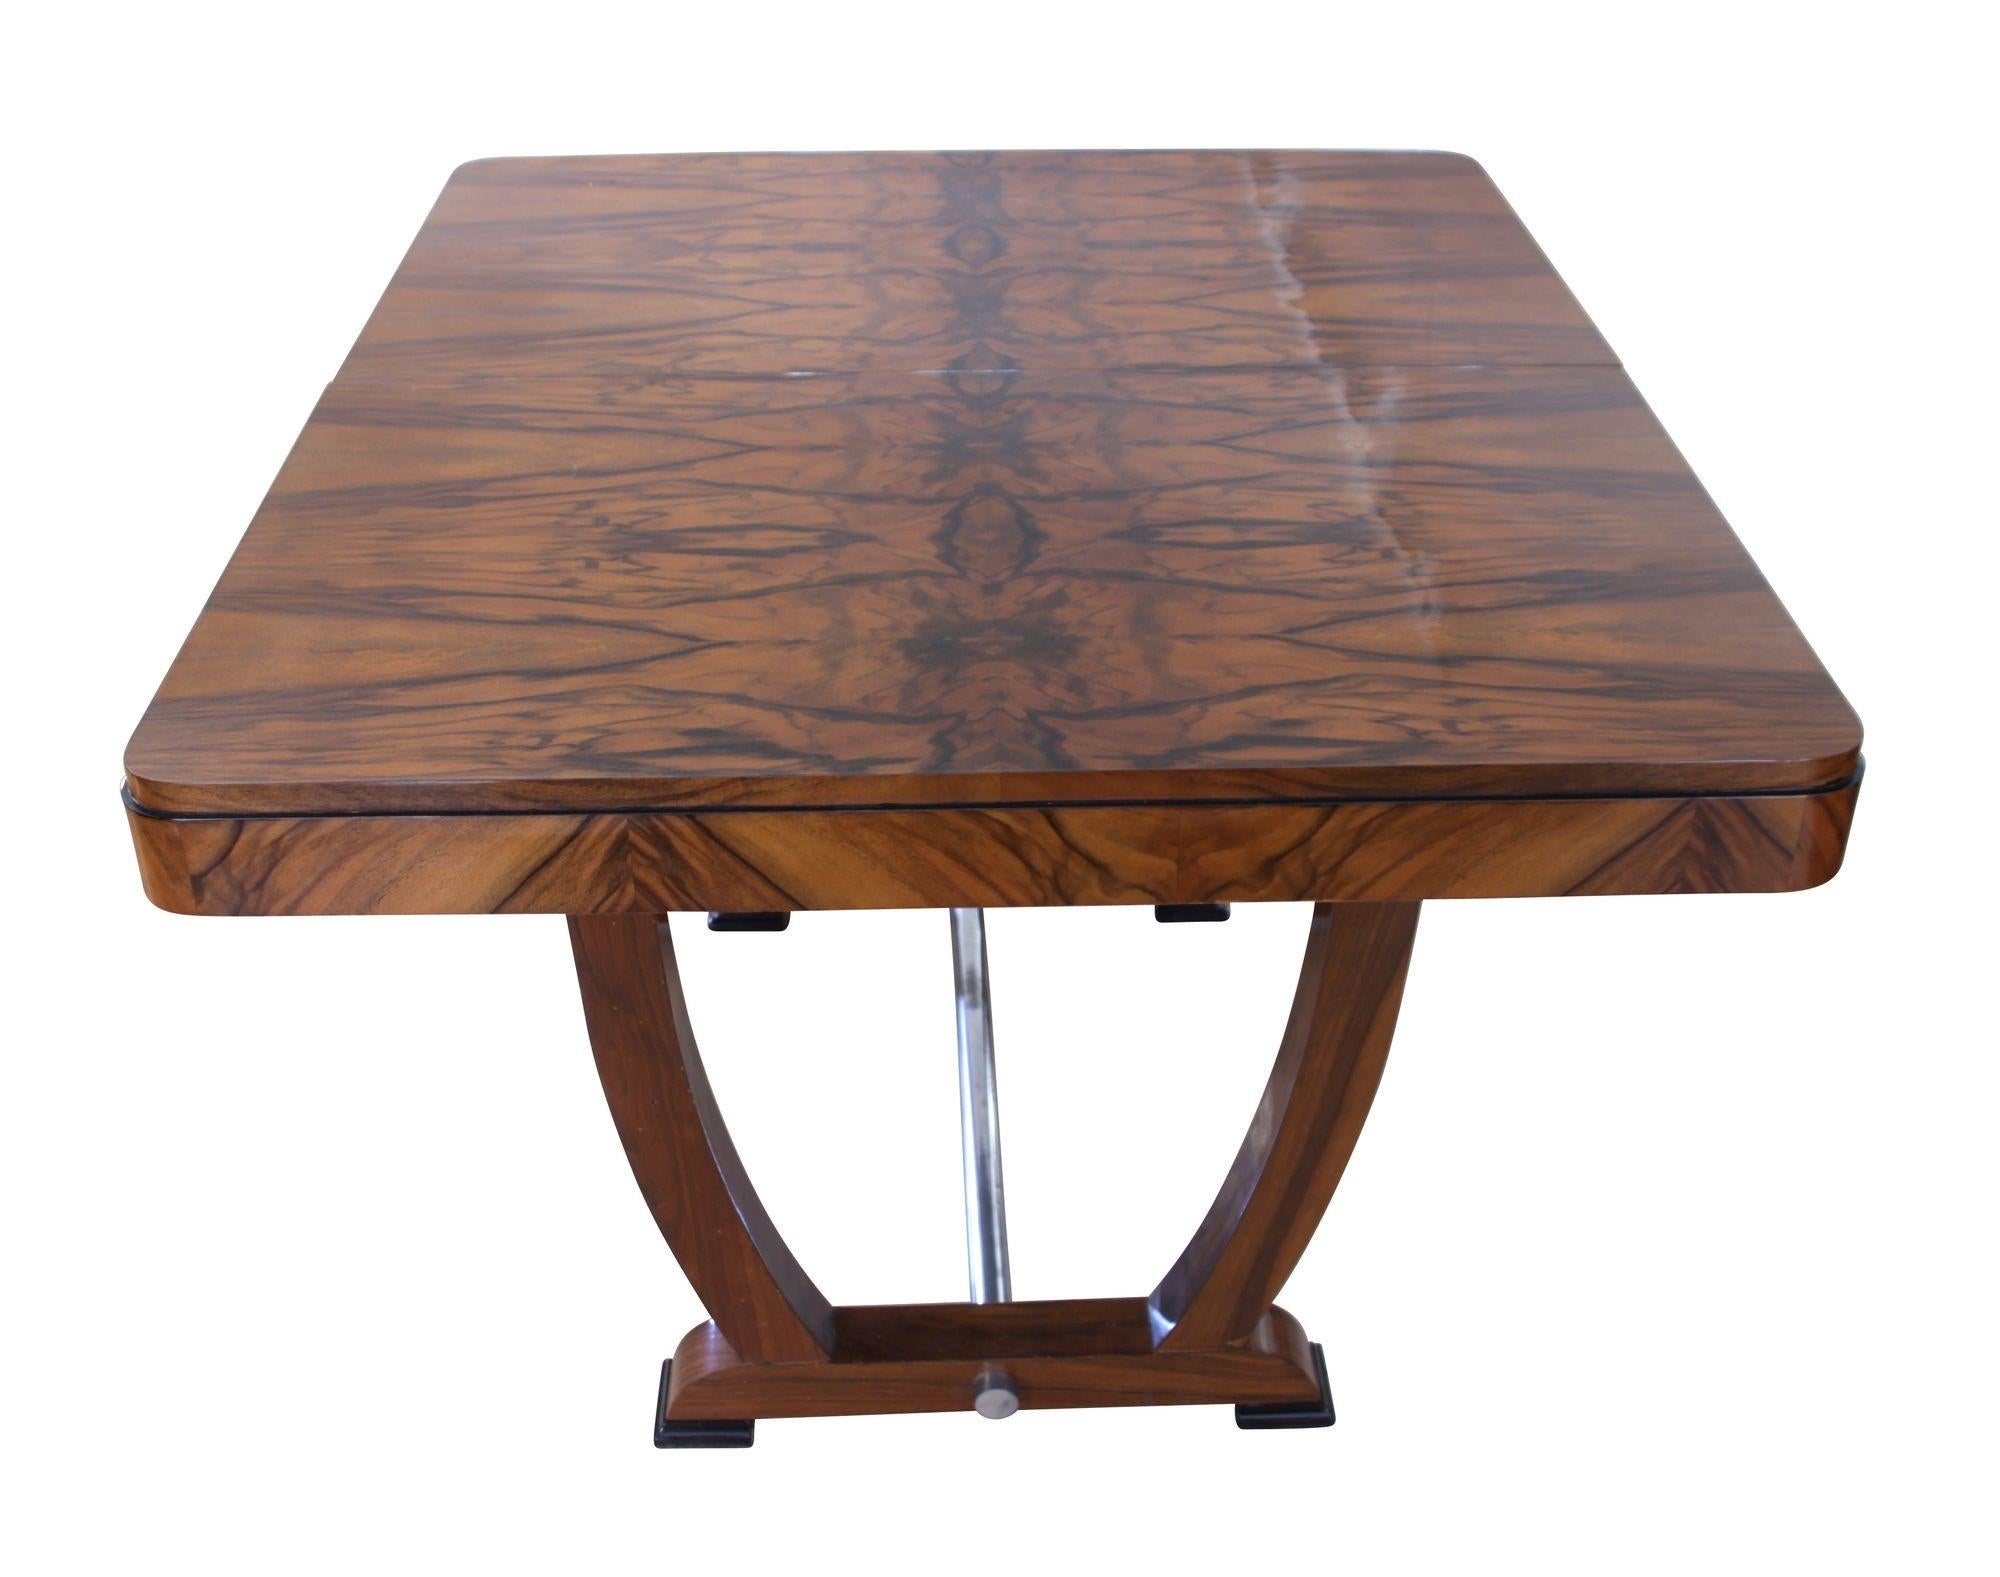 Expandable original Art Deco Dining Room Table in Walnut Veneer from France circa 1930.
The plate of the table have an amazing book-matched walnut veneer, which has been hand-polished with shellac (French polished). The apron sides of the plate and